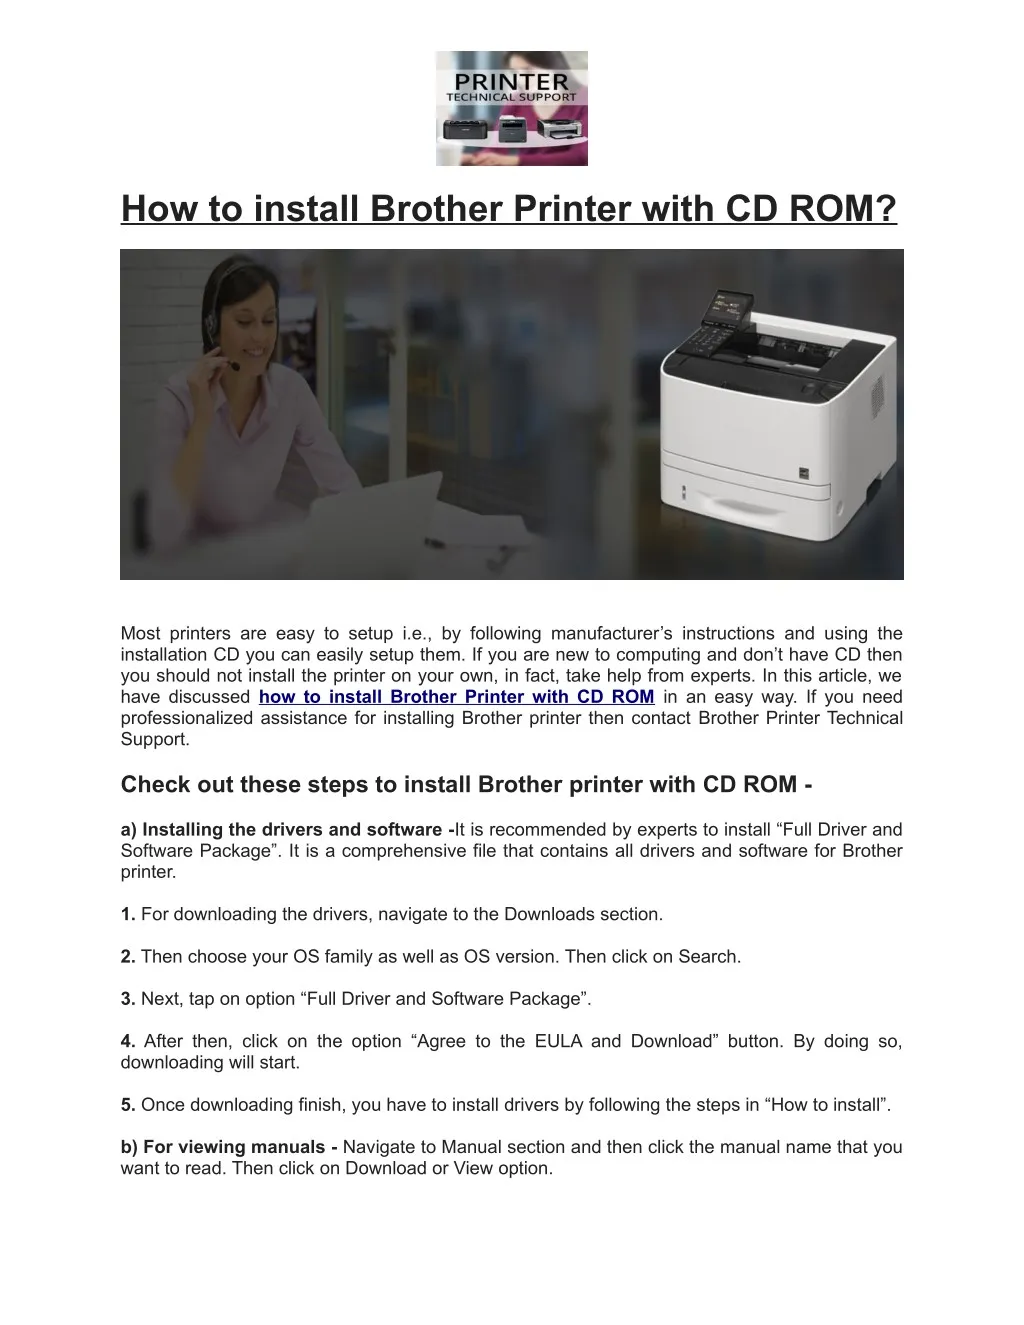 how to install brother printer with cd rom